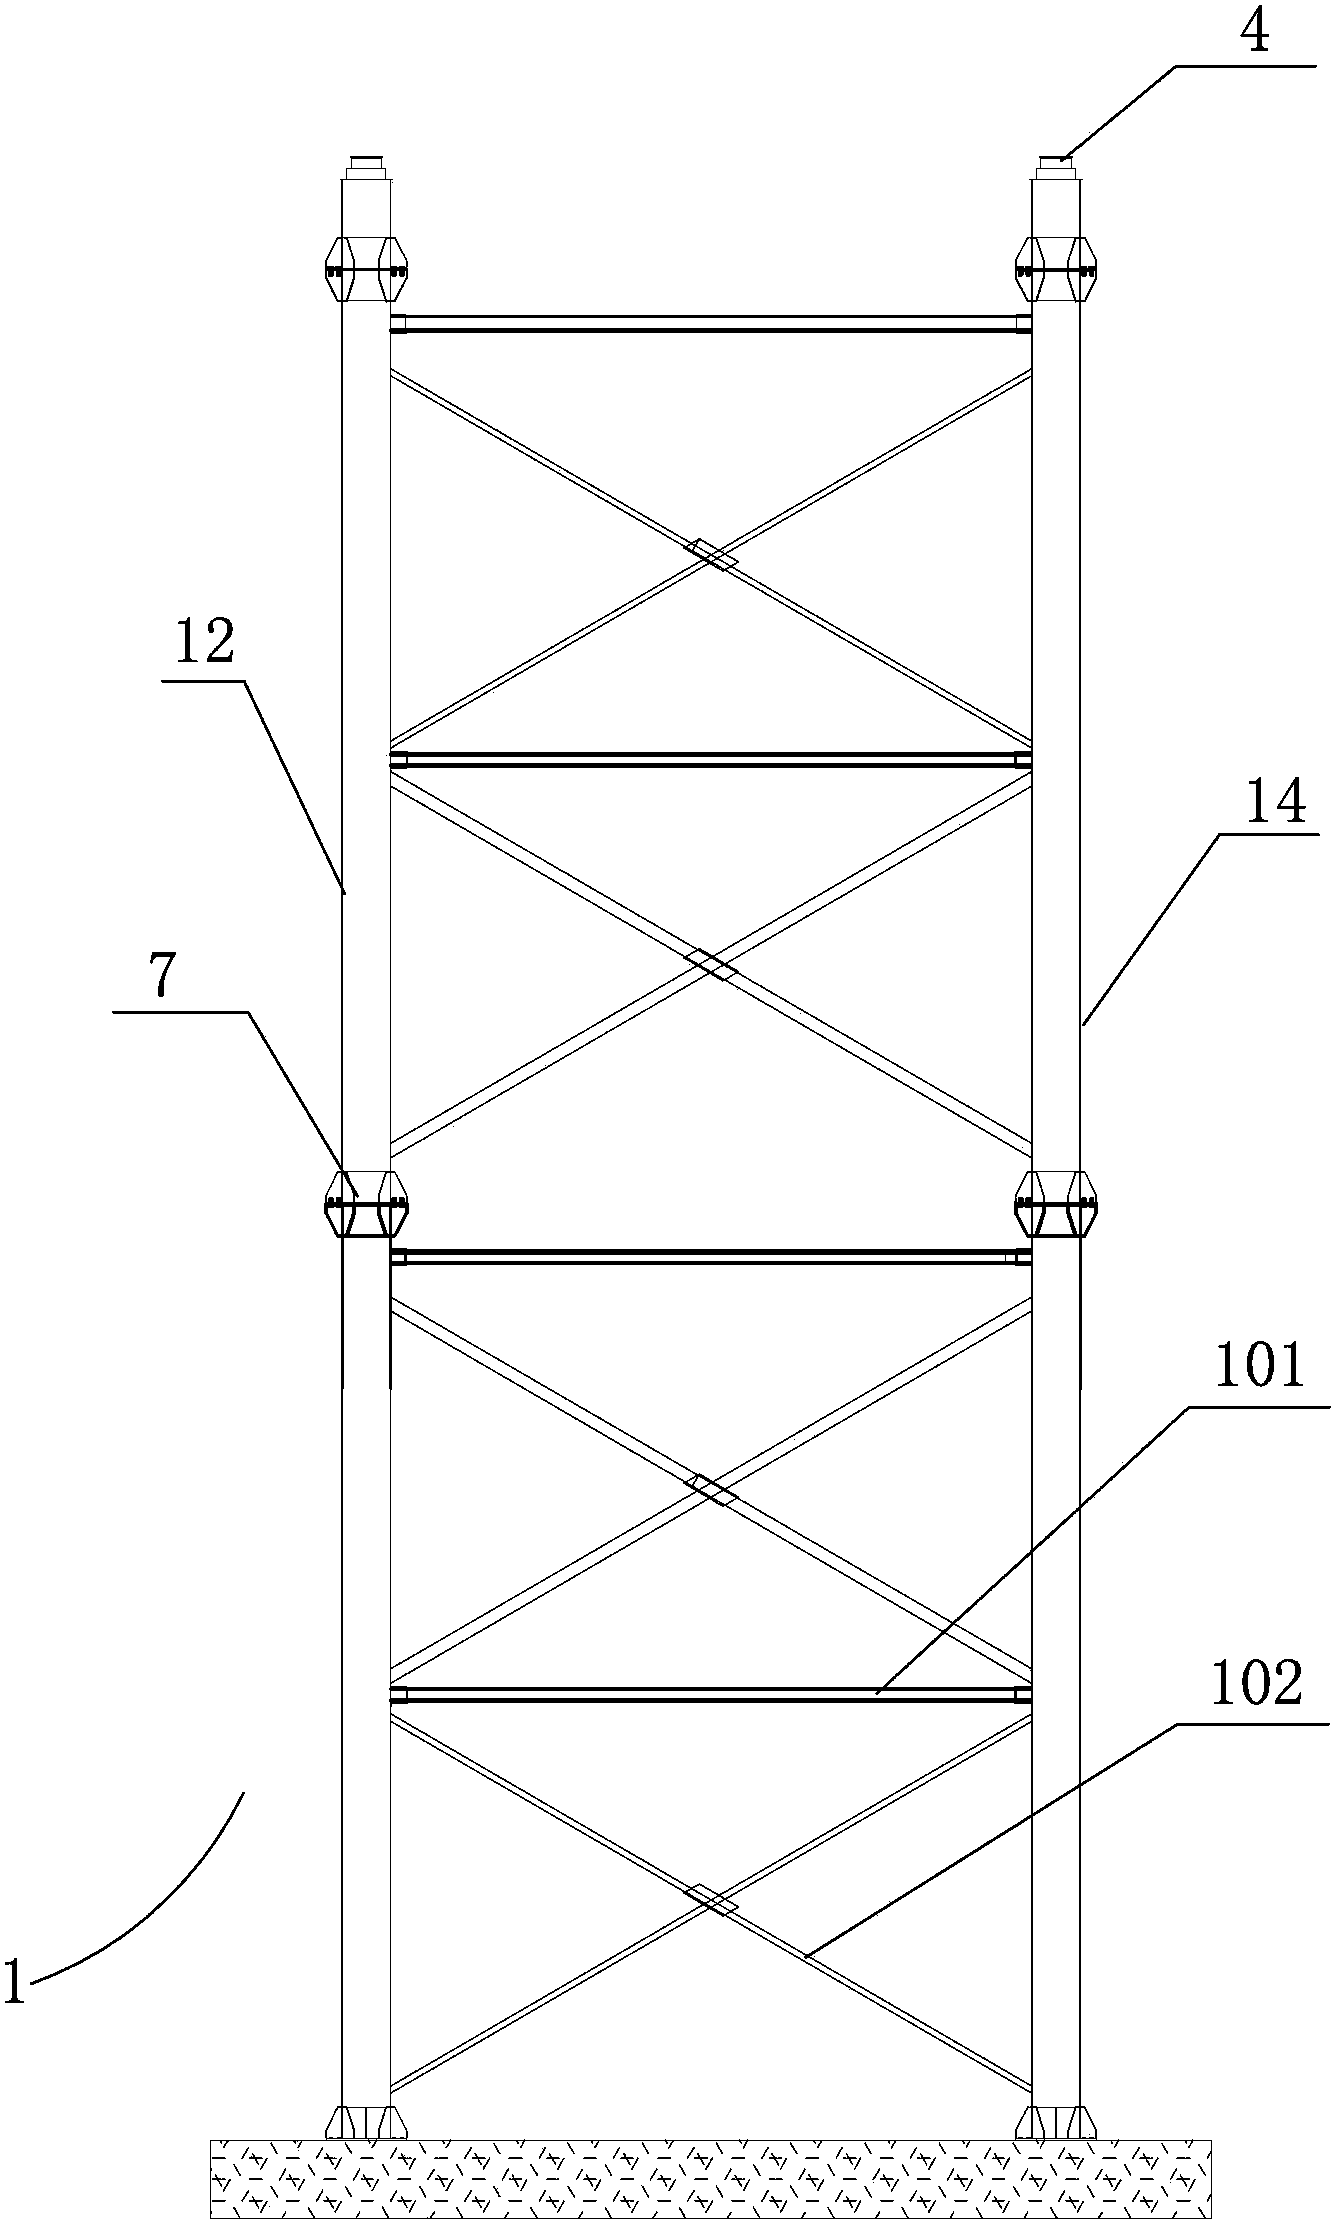 Construction method for ultrahigh combined support for bridge side span cast-in-situ section